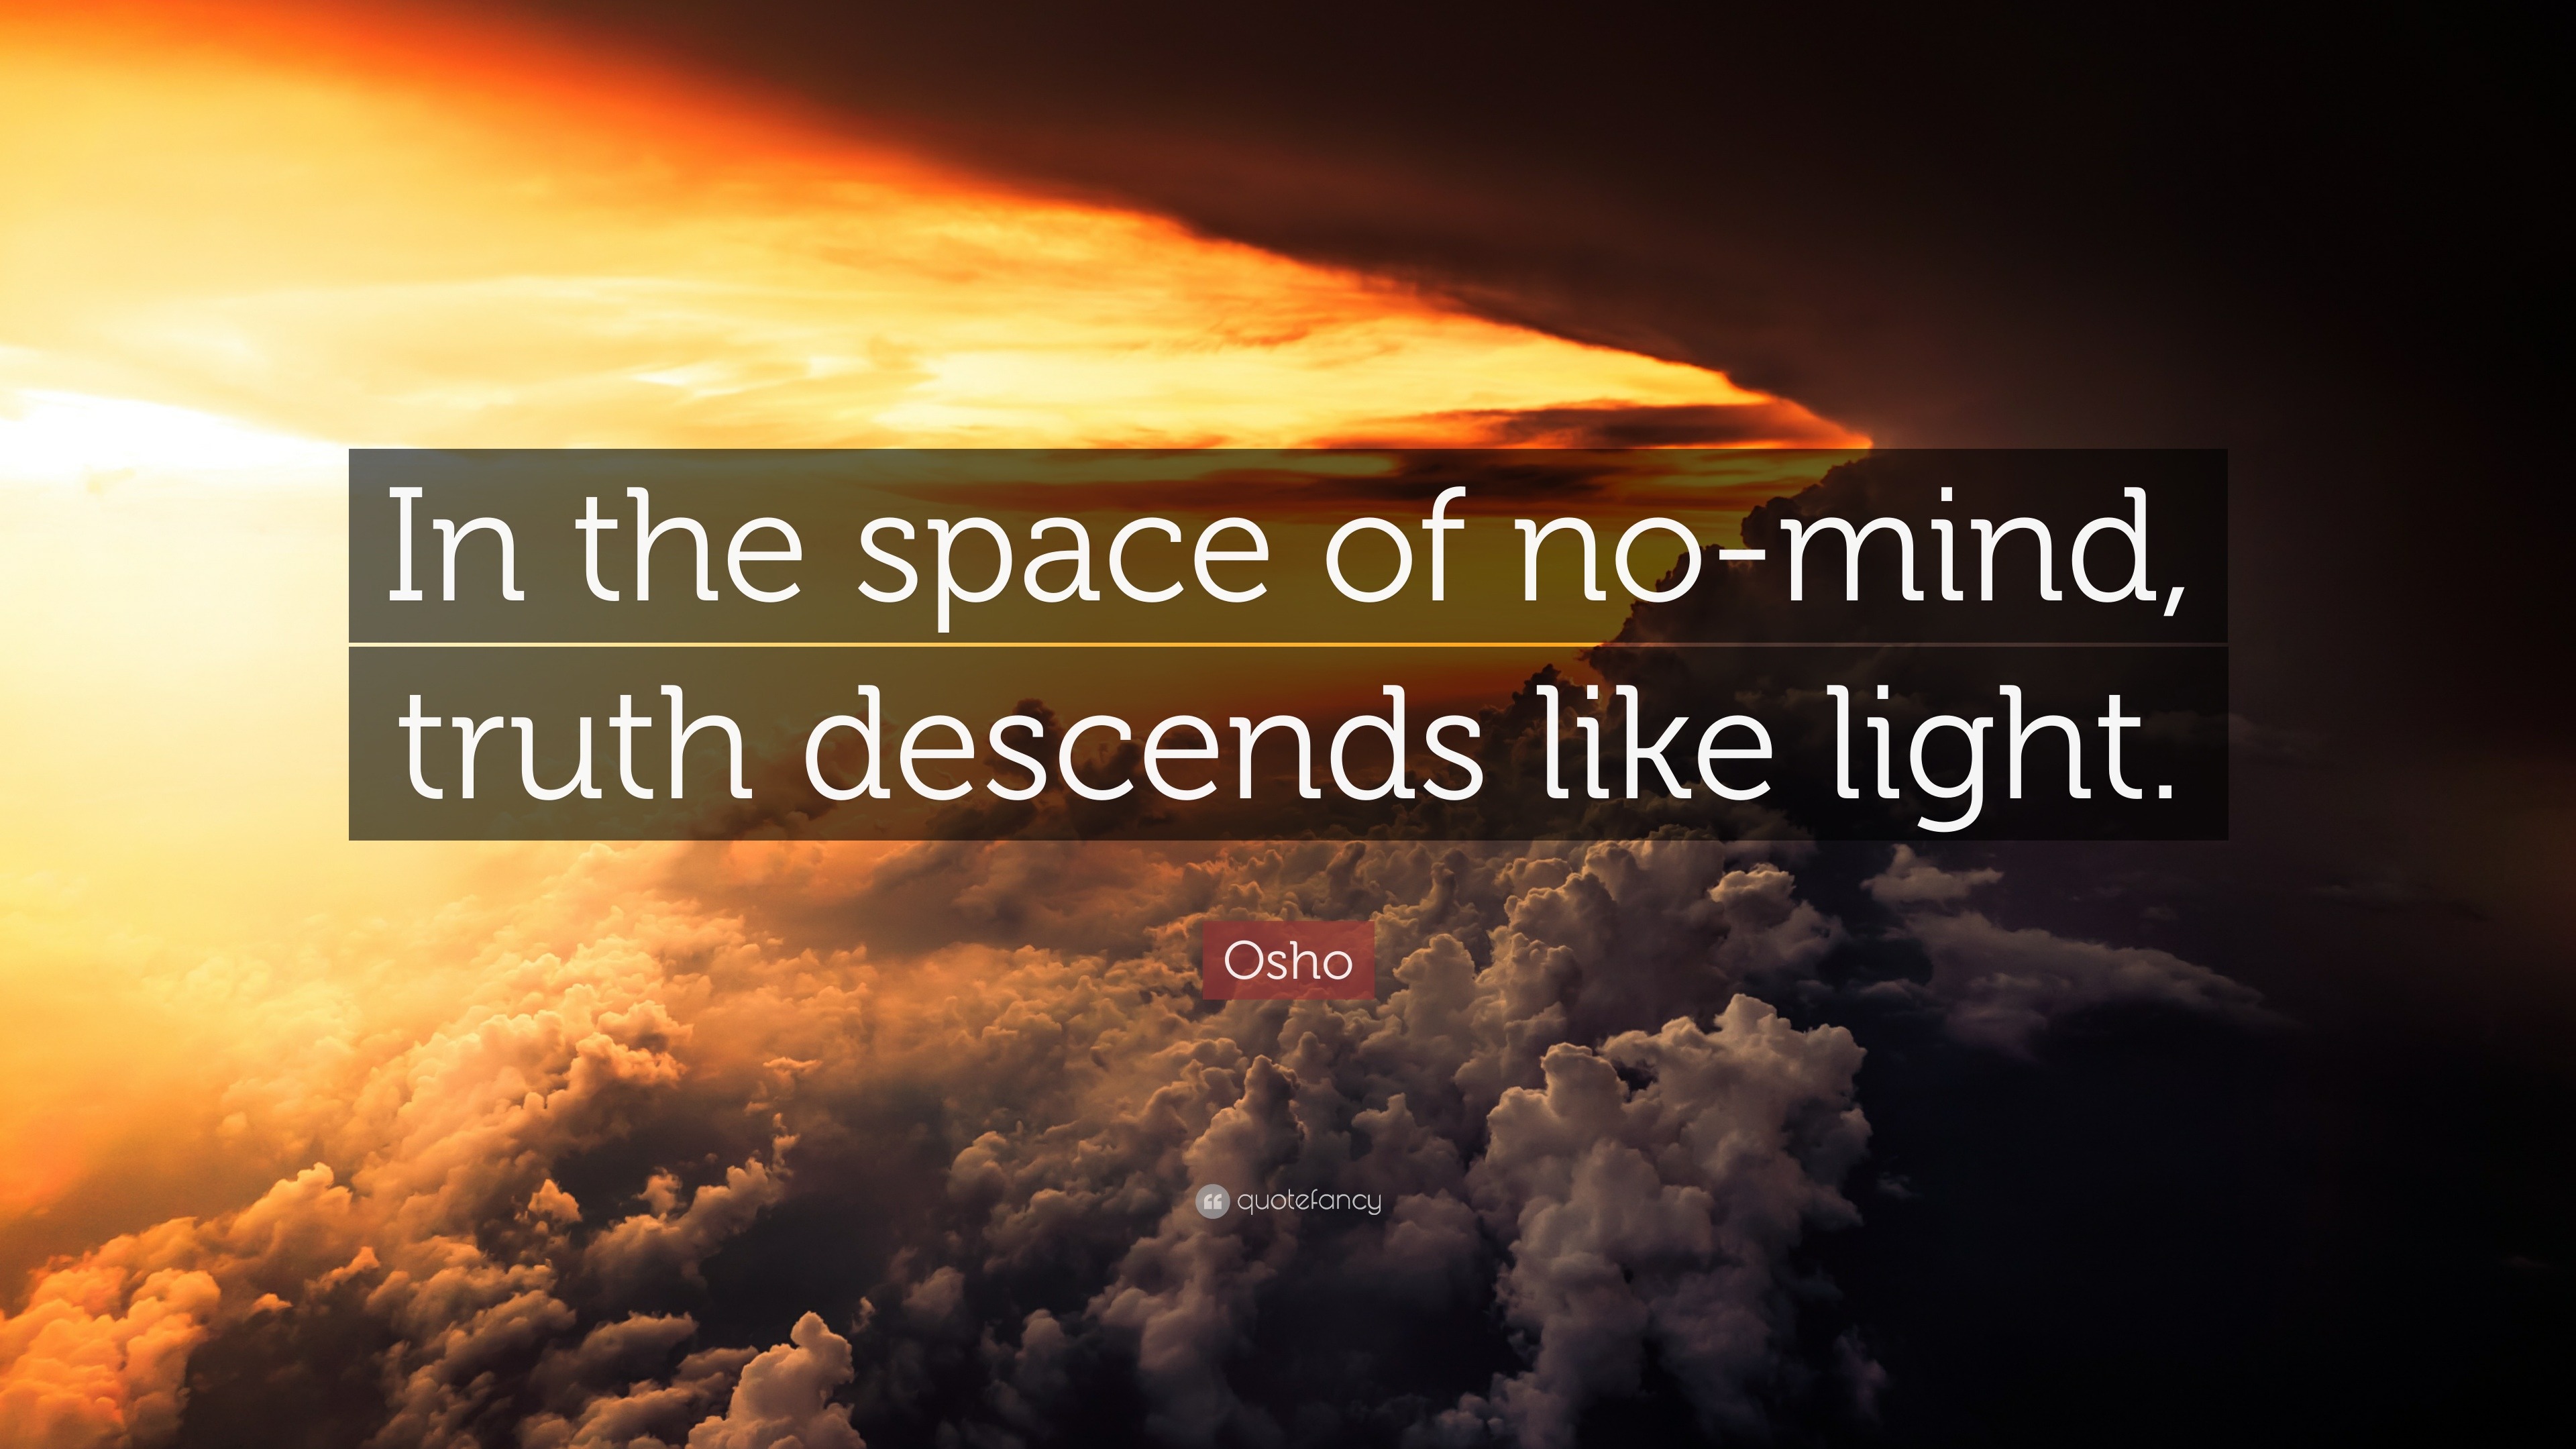 quotes on life osho